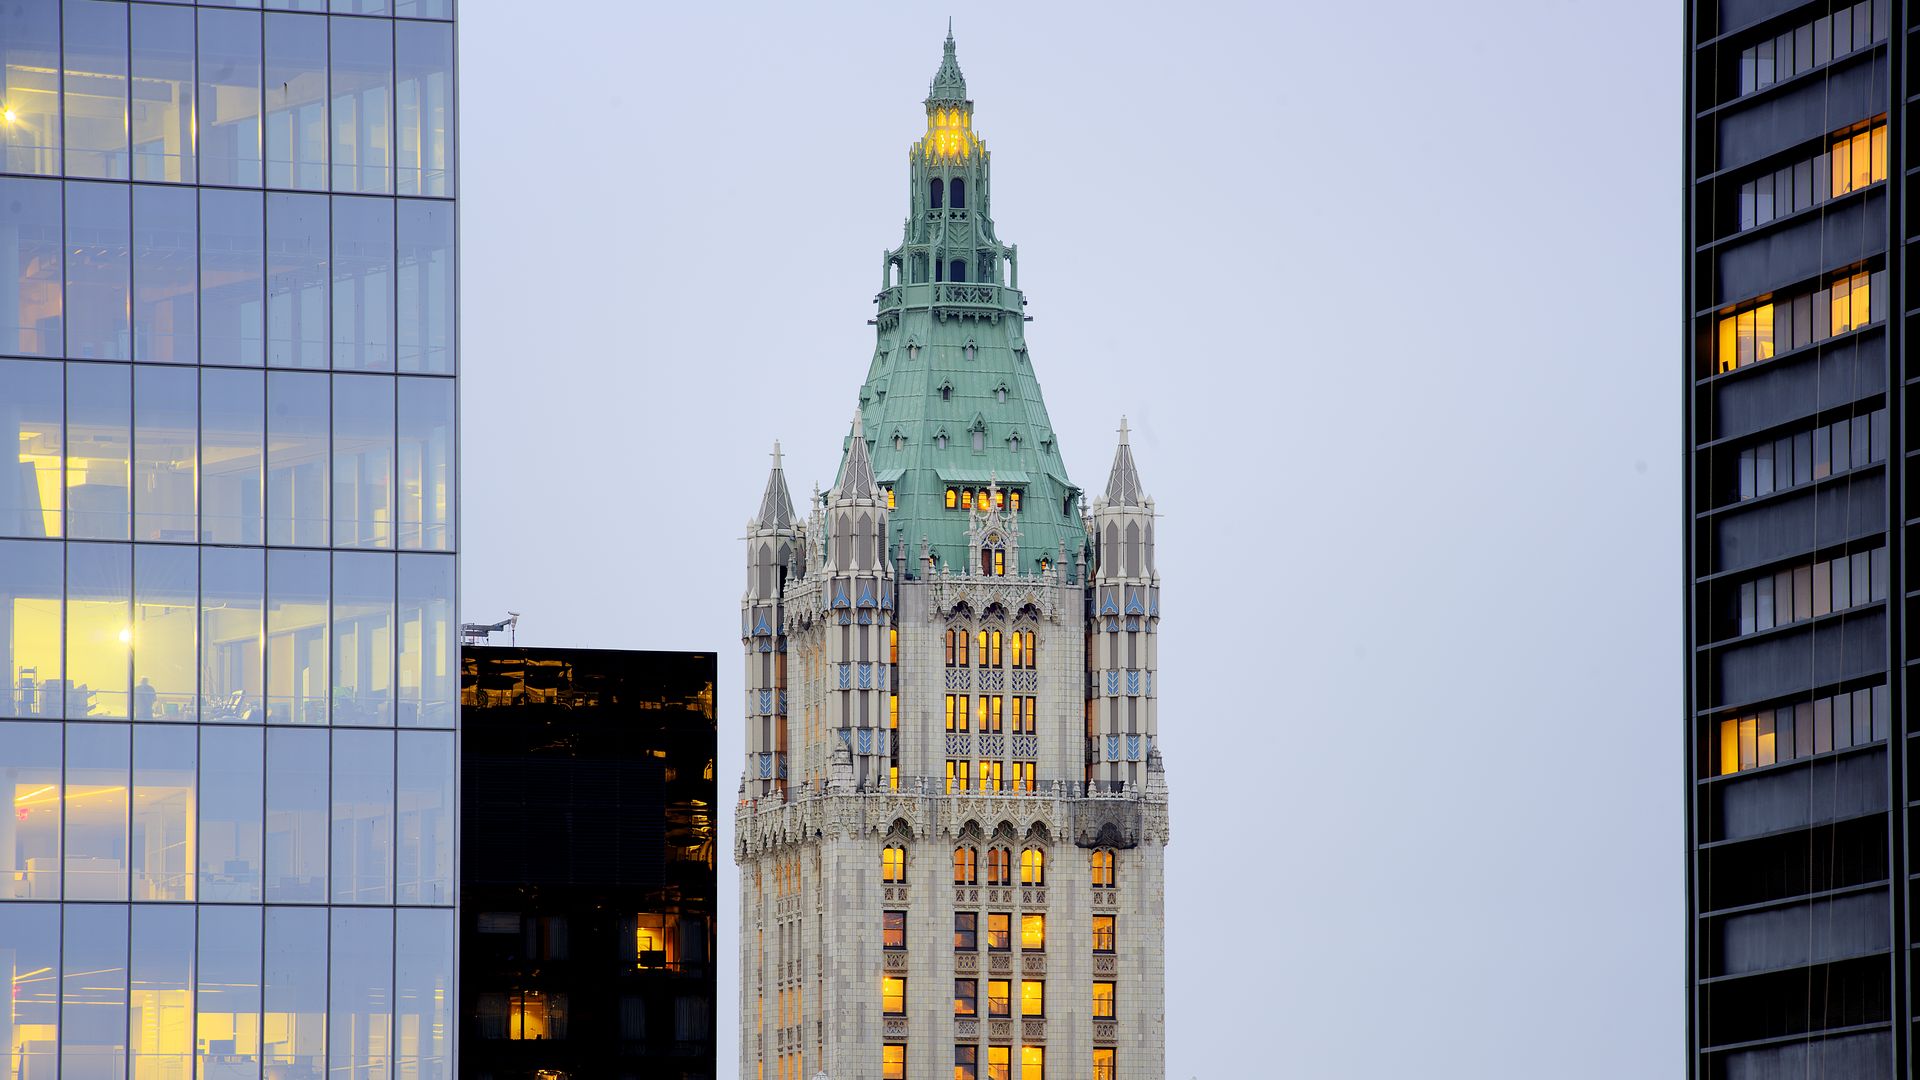 The Pinnacle of the Woolworth Building